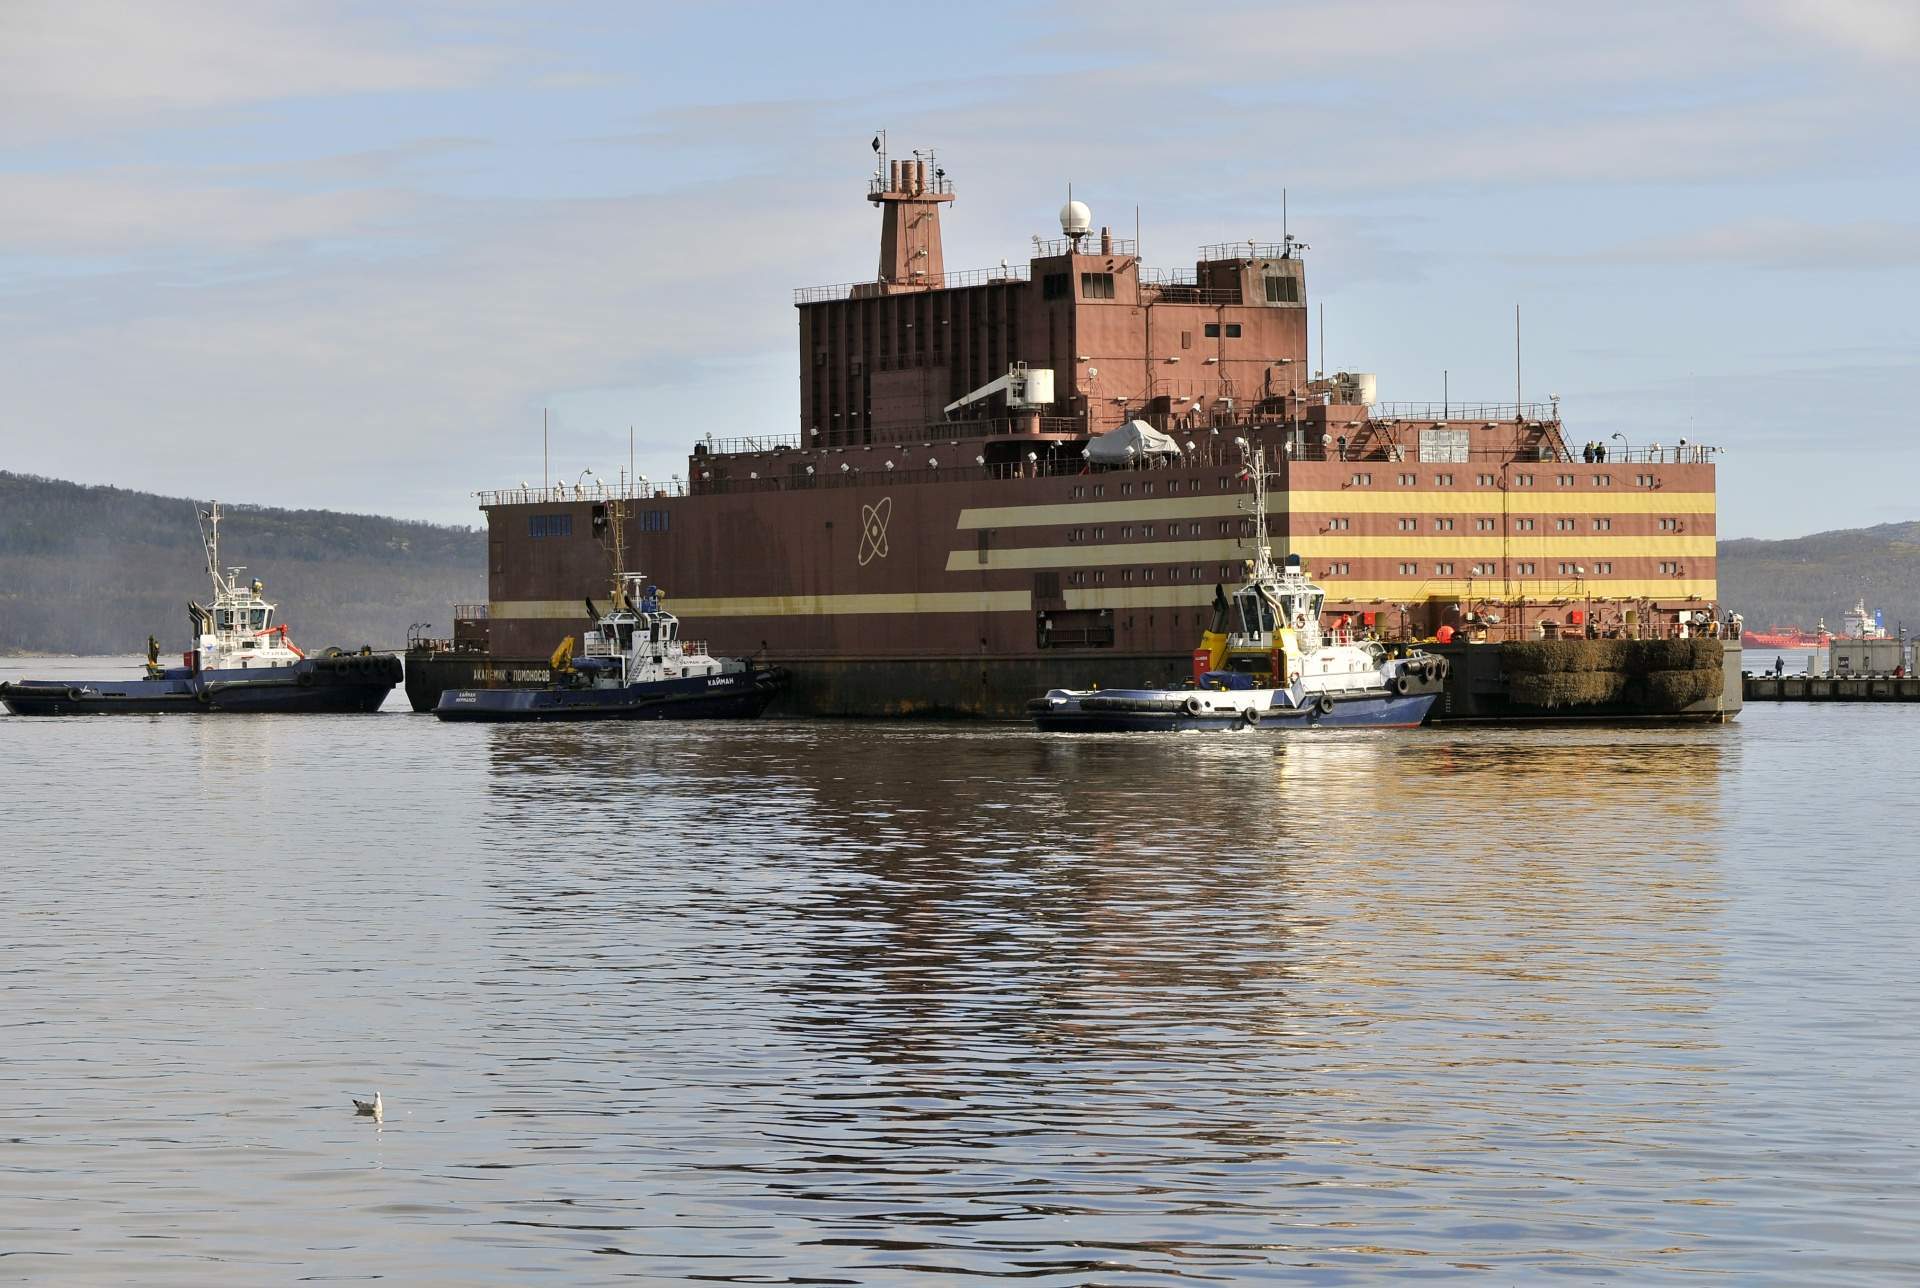 Russia’s first floating nuclear power plant arrives in Murmansk for fuel loading